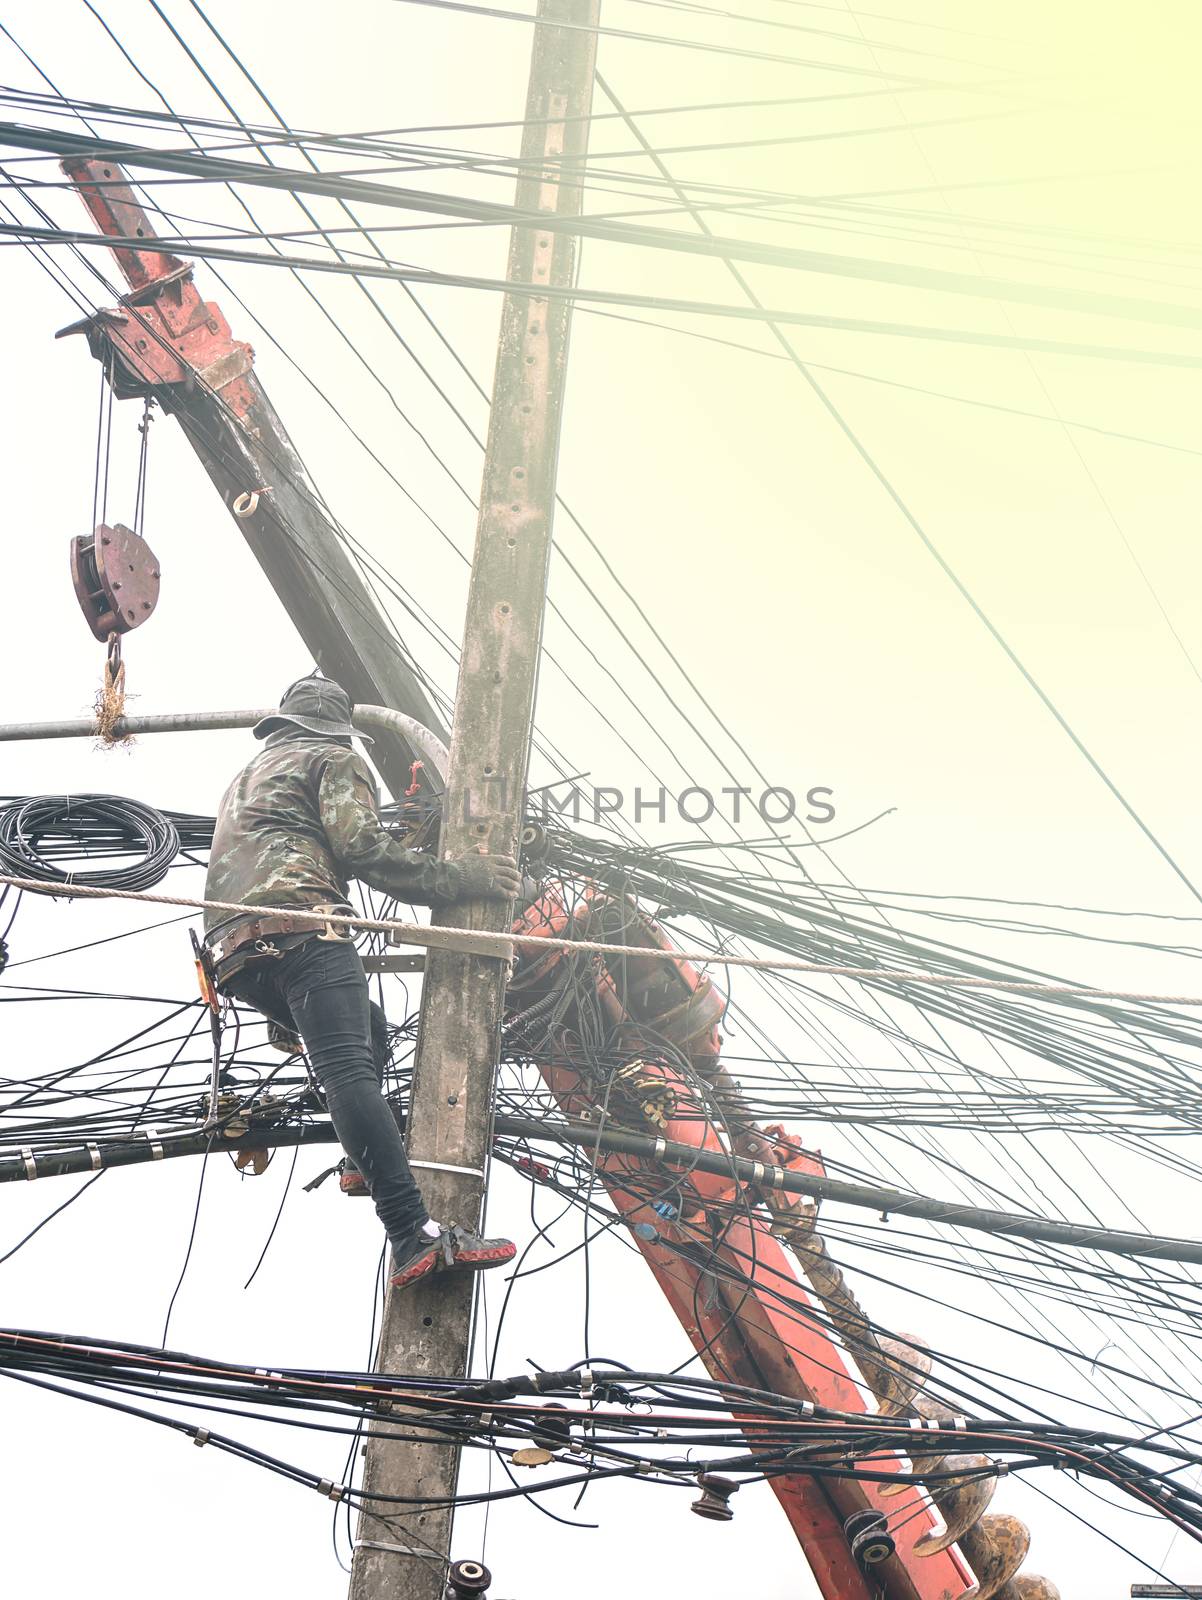 Repair workers are swinging on cable posts to fix the line of network cable and wire on electric pole in Thailand